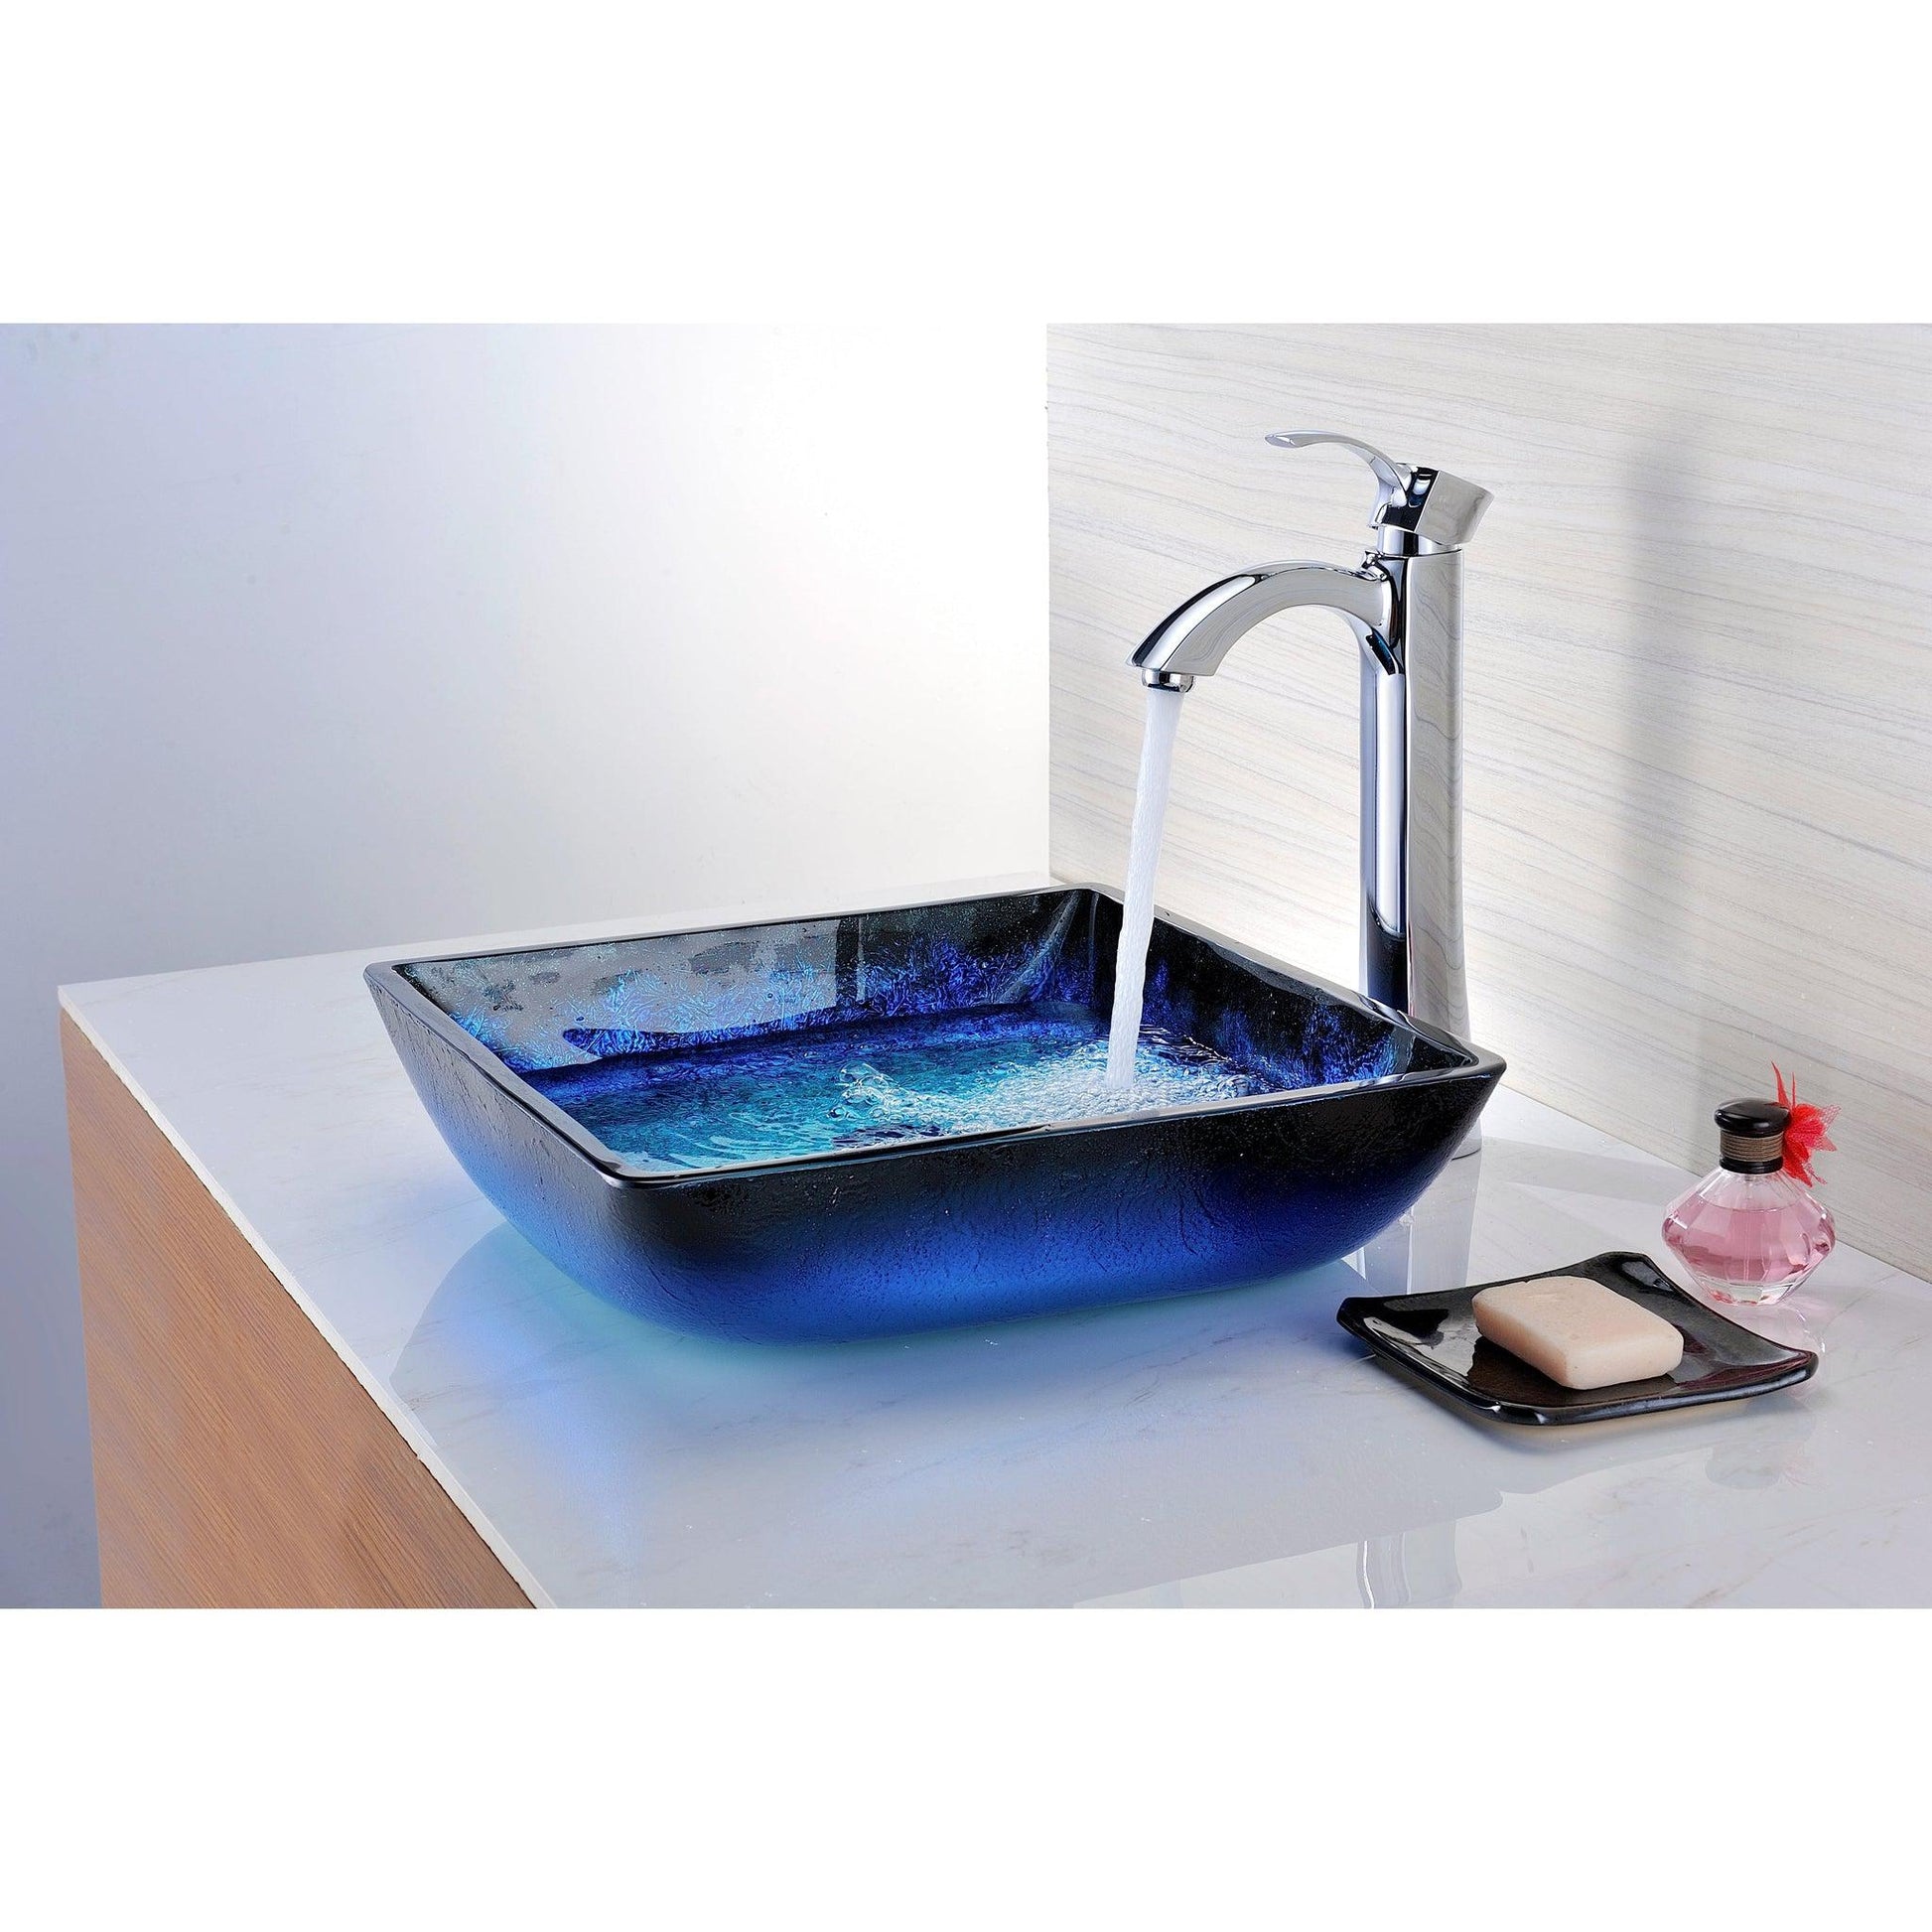 ANZZI Viace Series 15" x 15" Square Shaped Blazing Blue Deco-Glass Vessel Sink With Polished Chrome Pop-Up Drain